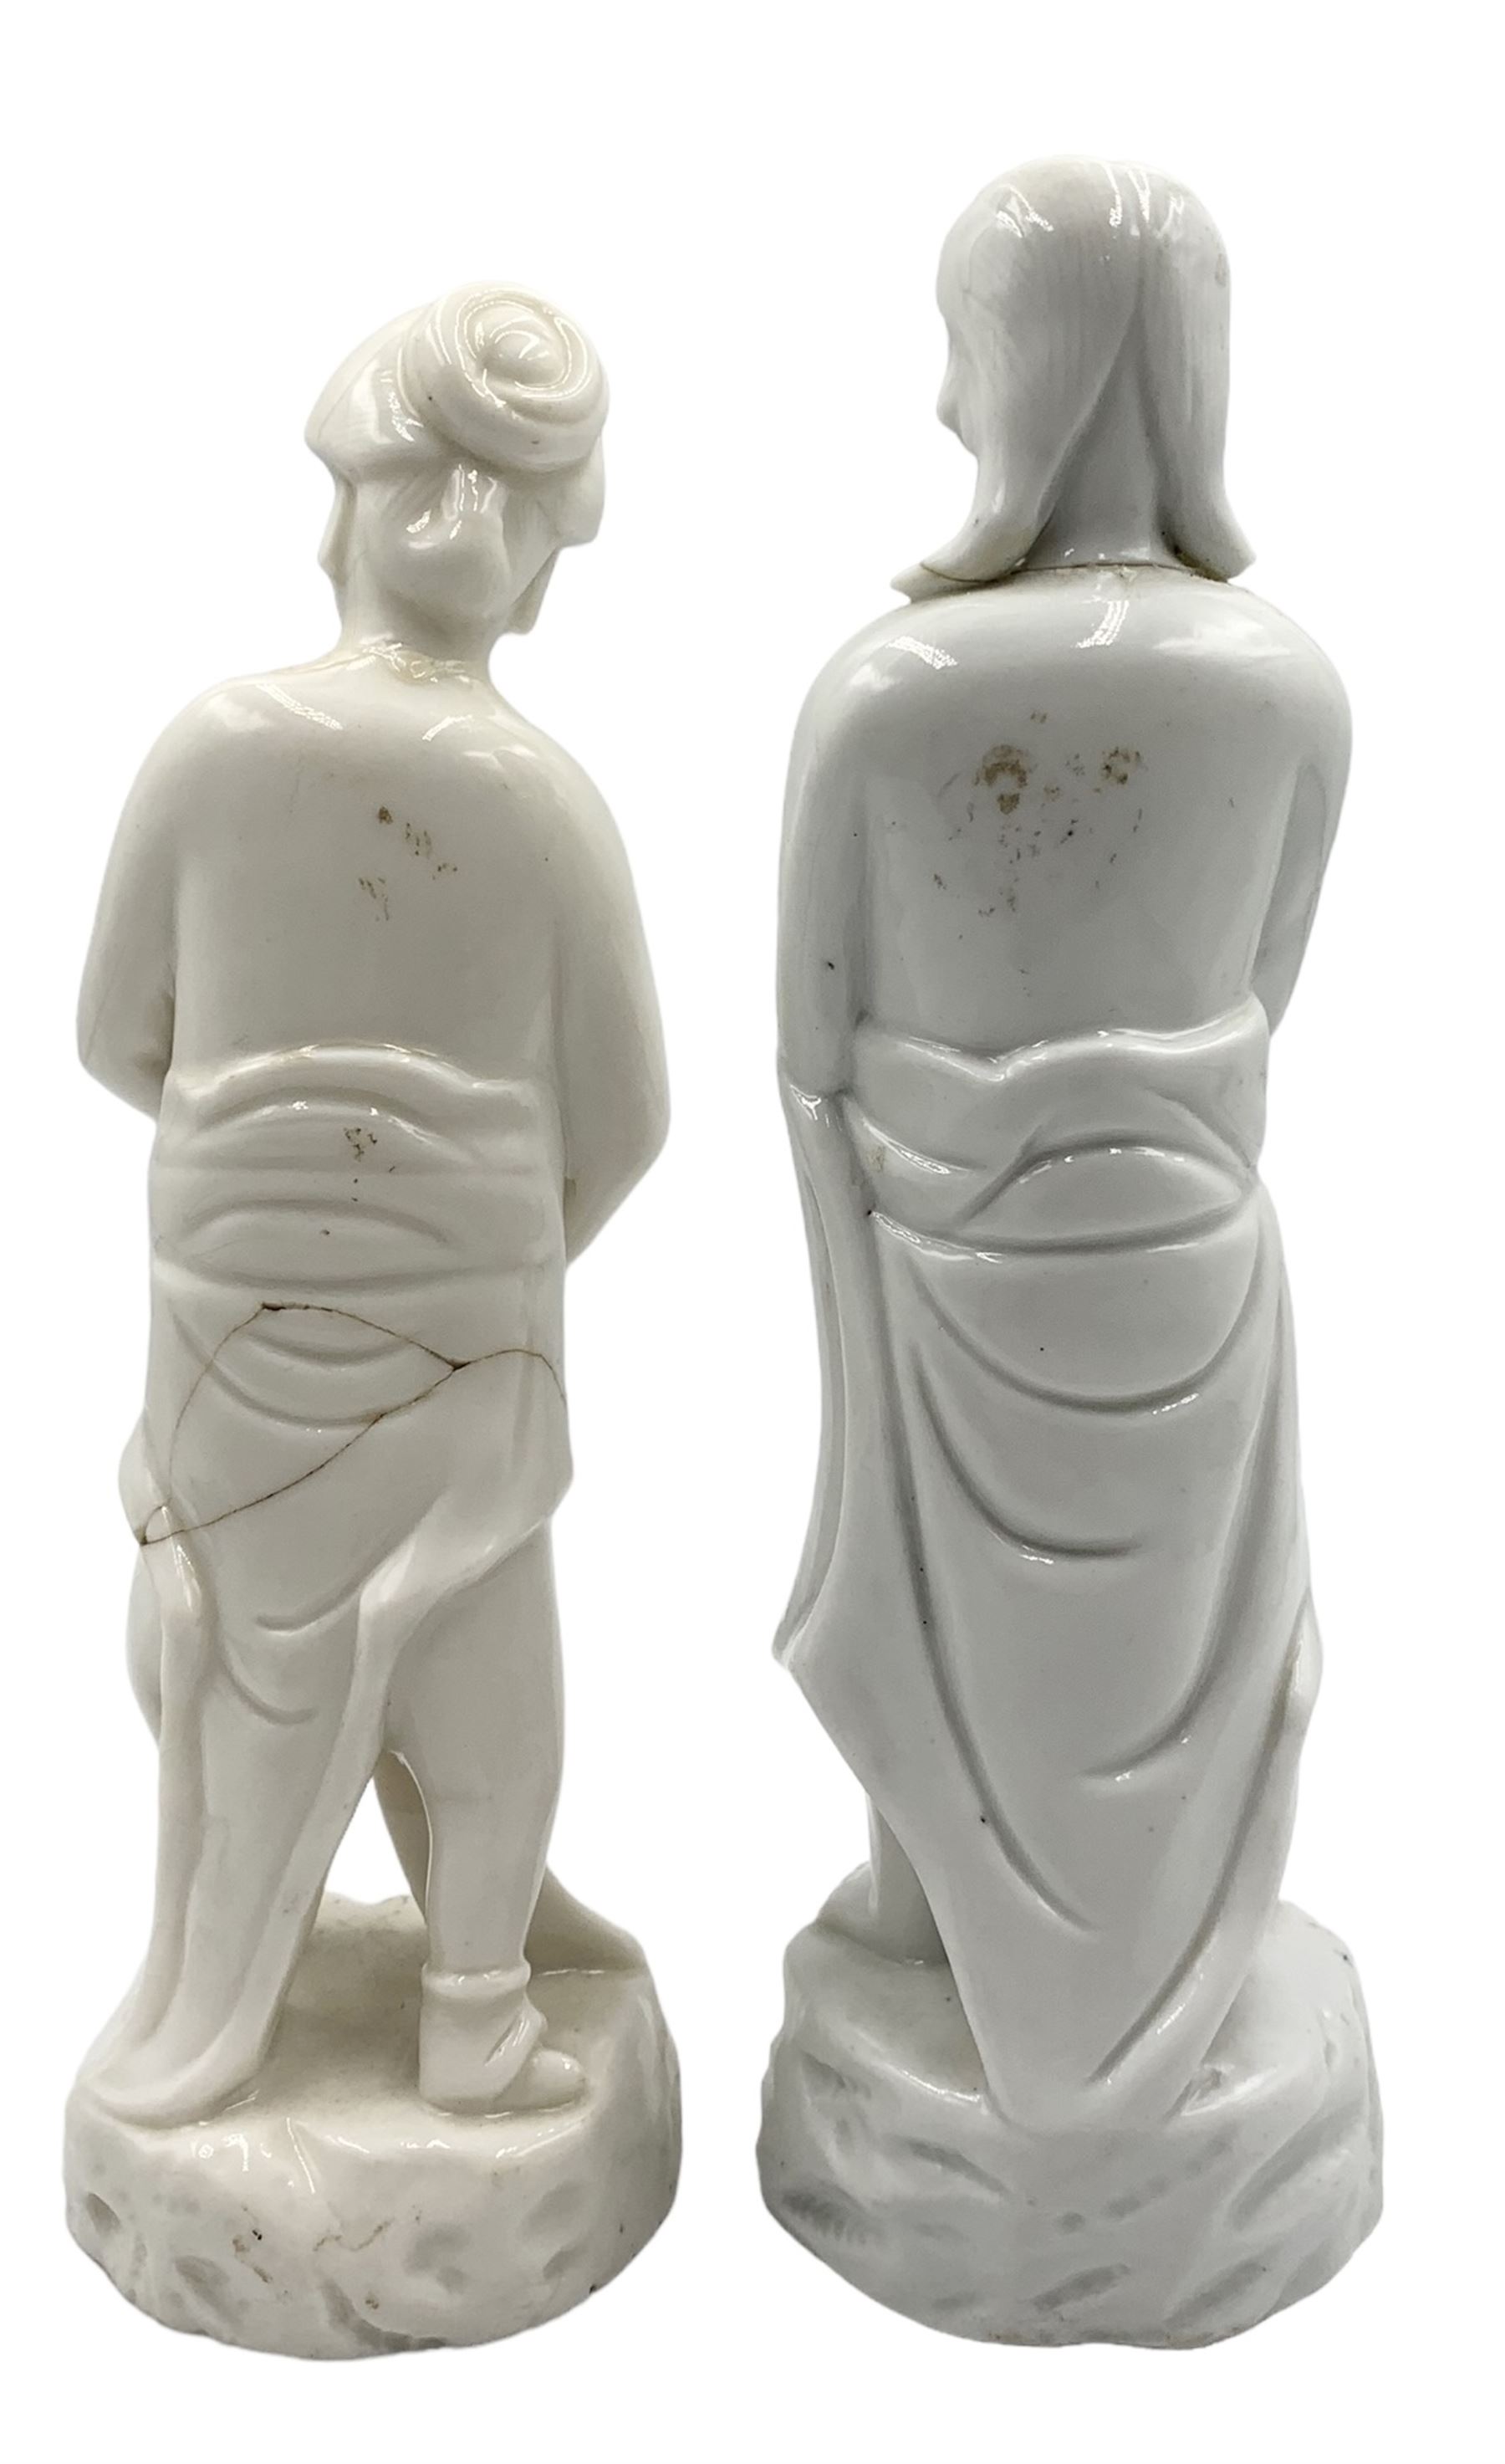 Matched pair of Qing dynasty 18th century Chinese Blanc de Chine porcelain 'Adam and Eve' figures - Image 6 of 6